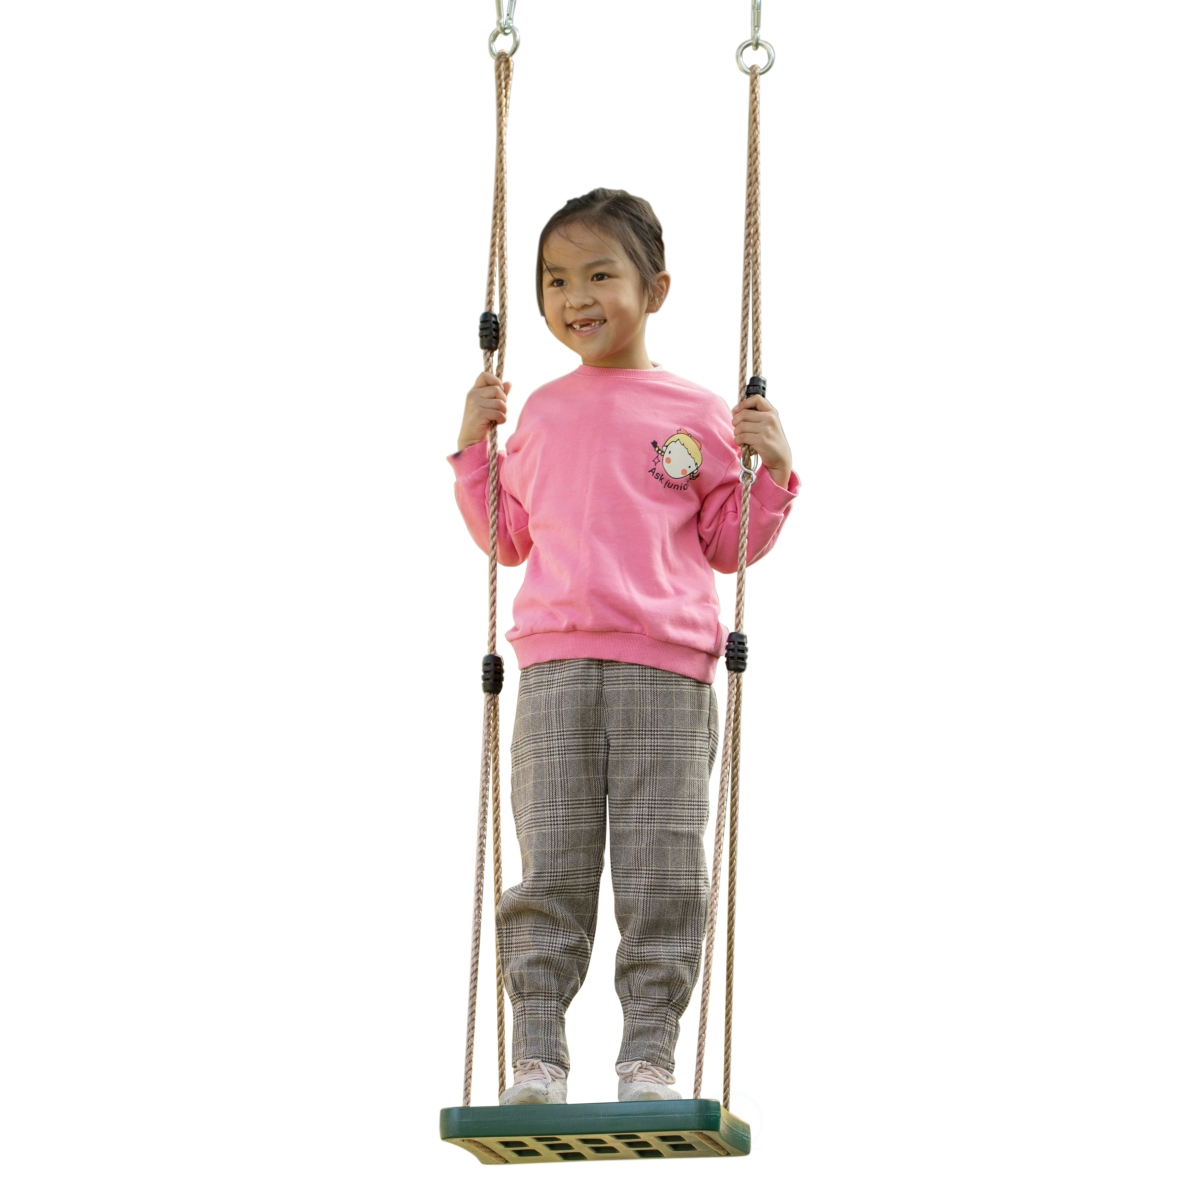 PLAYBERG QI003584.GN Adjustable Plastic Standing Swing, Outdoor Kids Playground Swing, Green